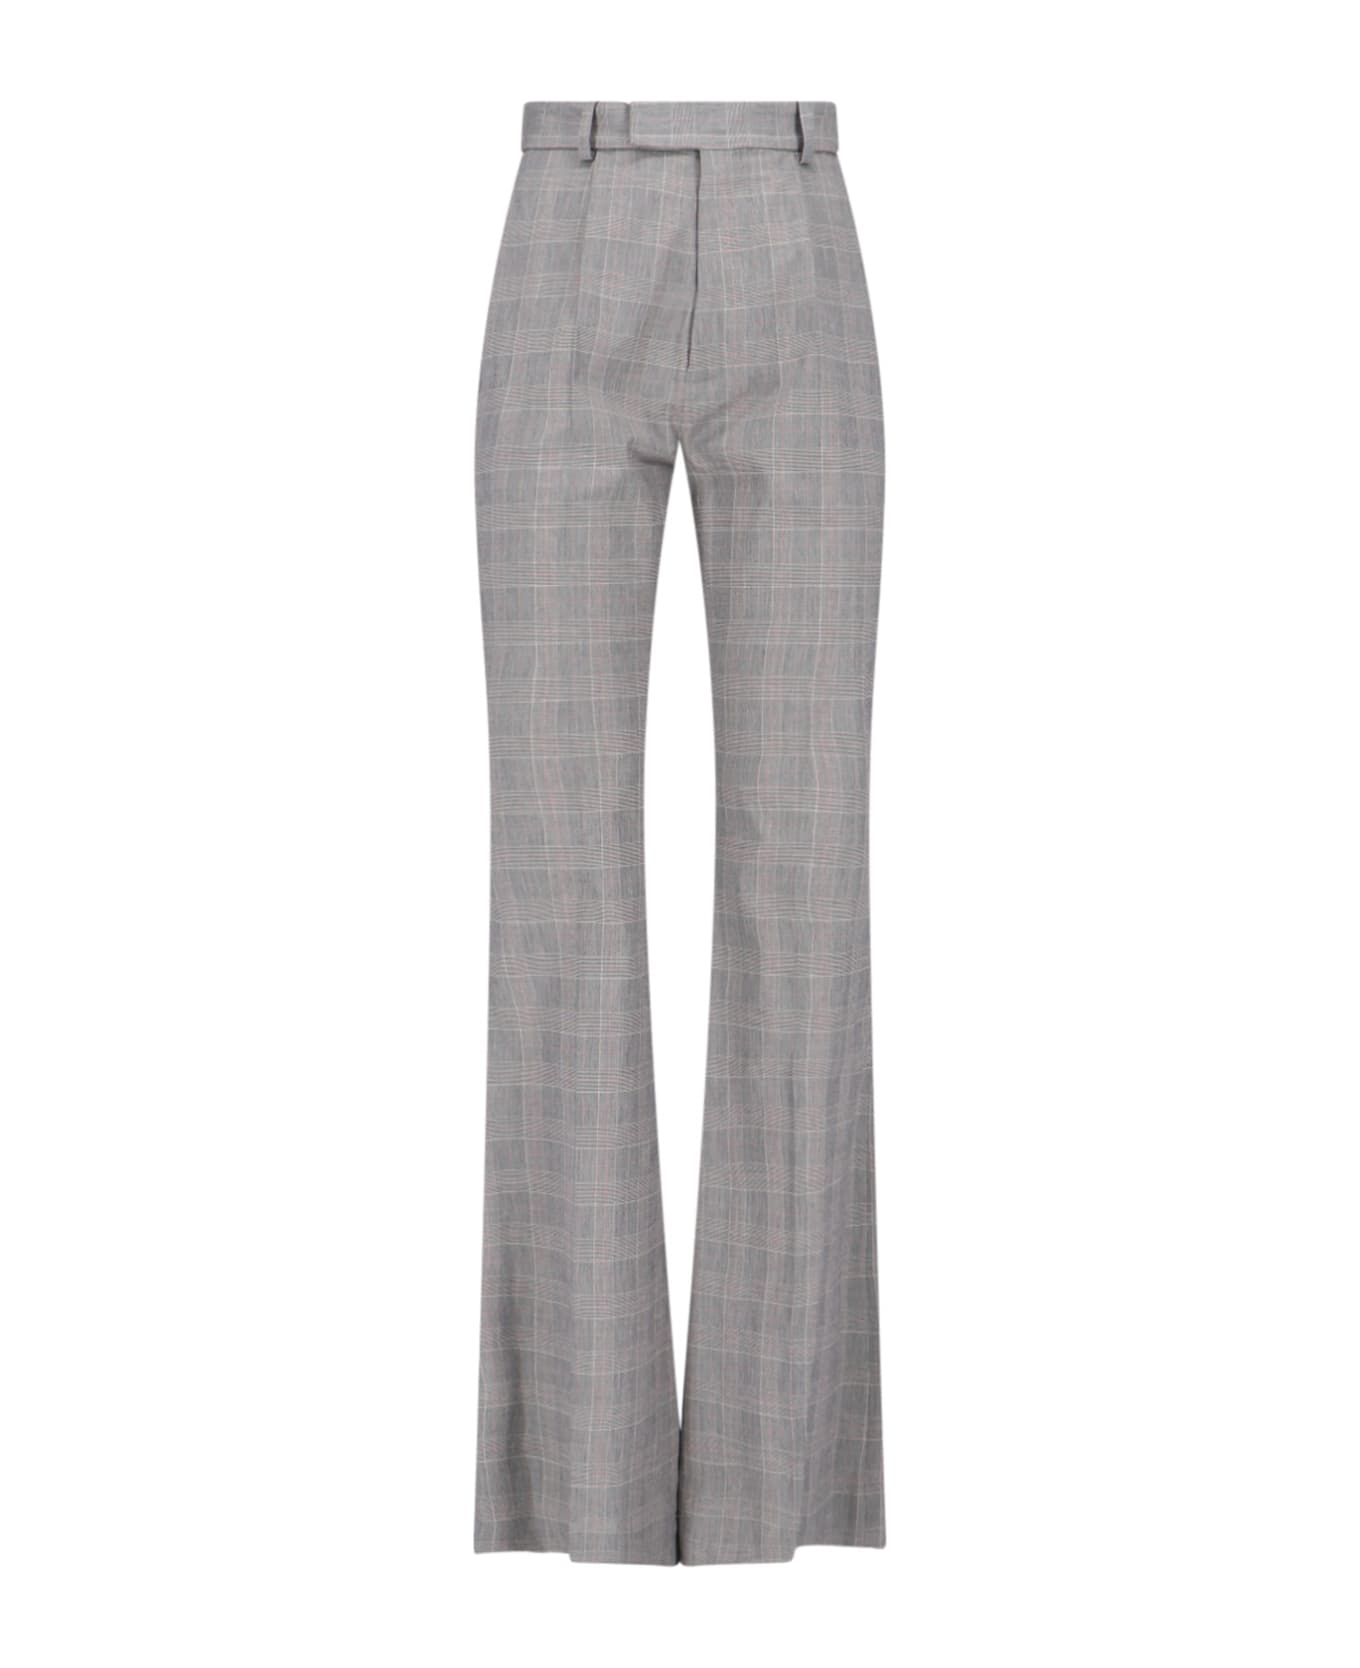 Vivienne Westwood 'ray' Bootcut Trousers - Gray ボトムス